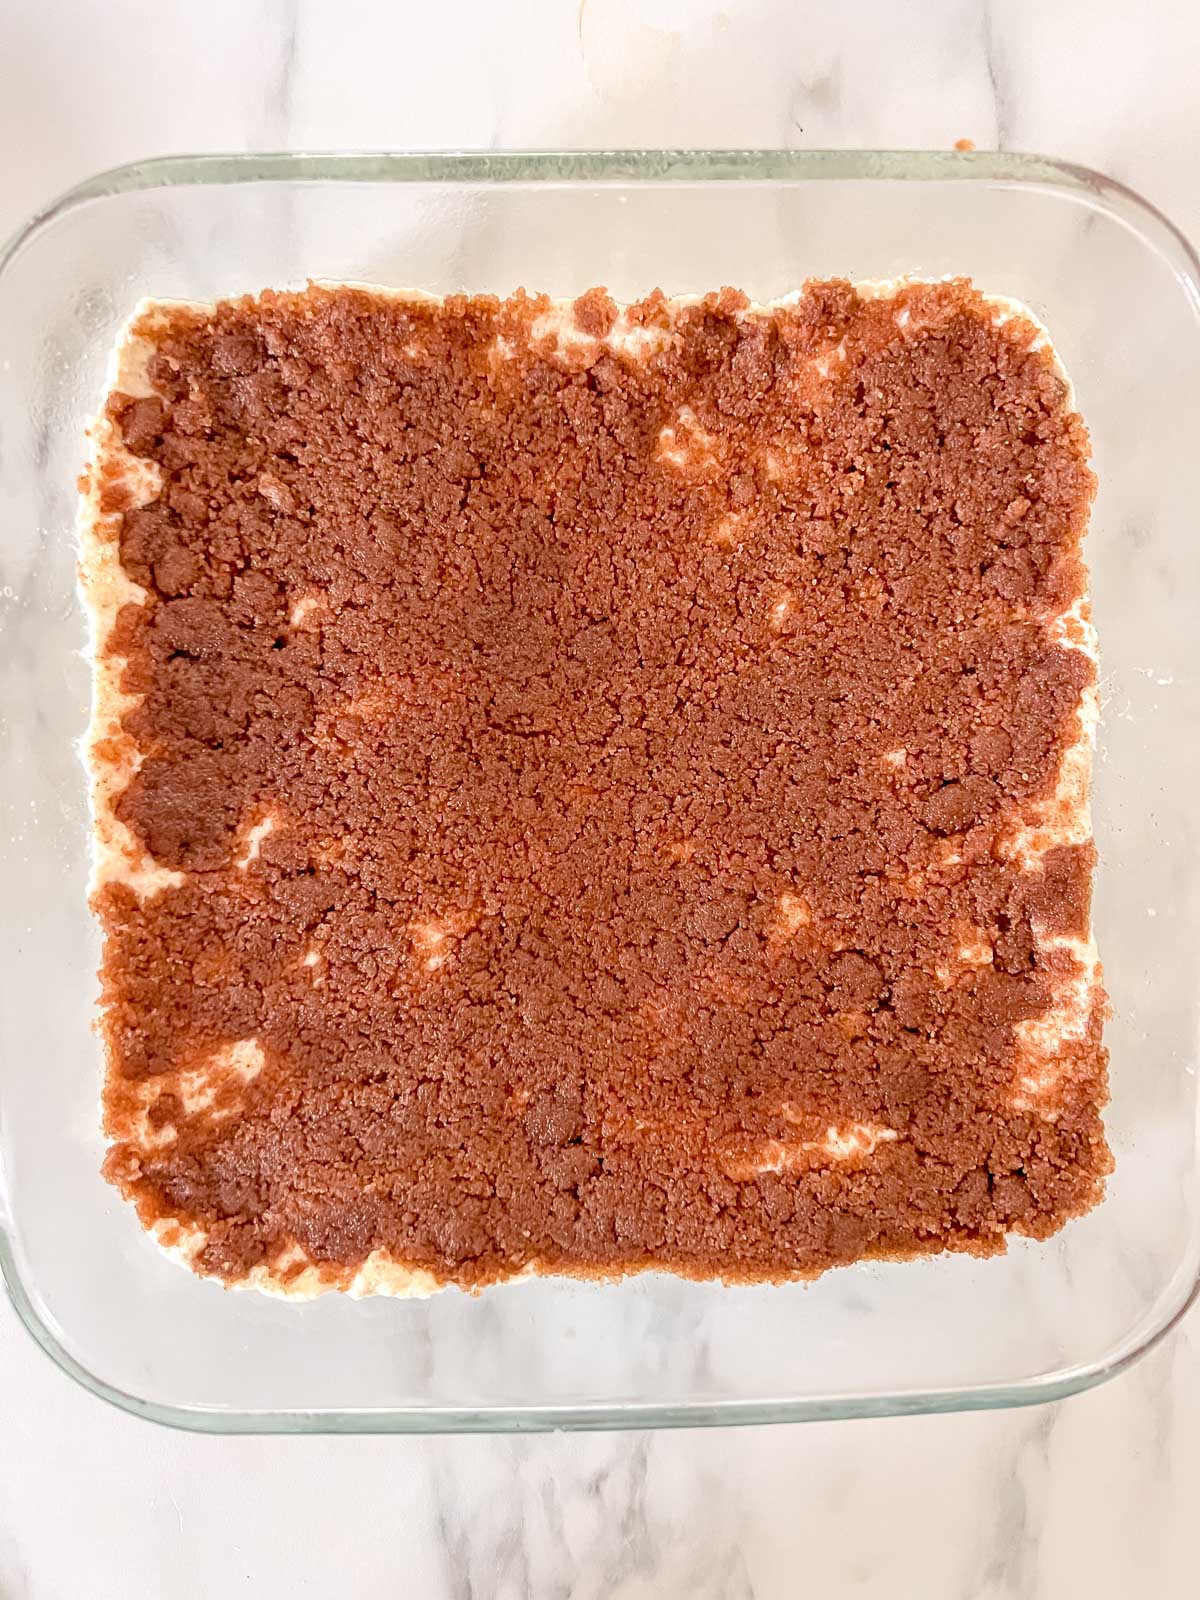 An 8x8 glass pan with half the dough pressed in it with a cinnamon sugar topping on it. 